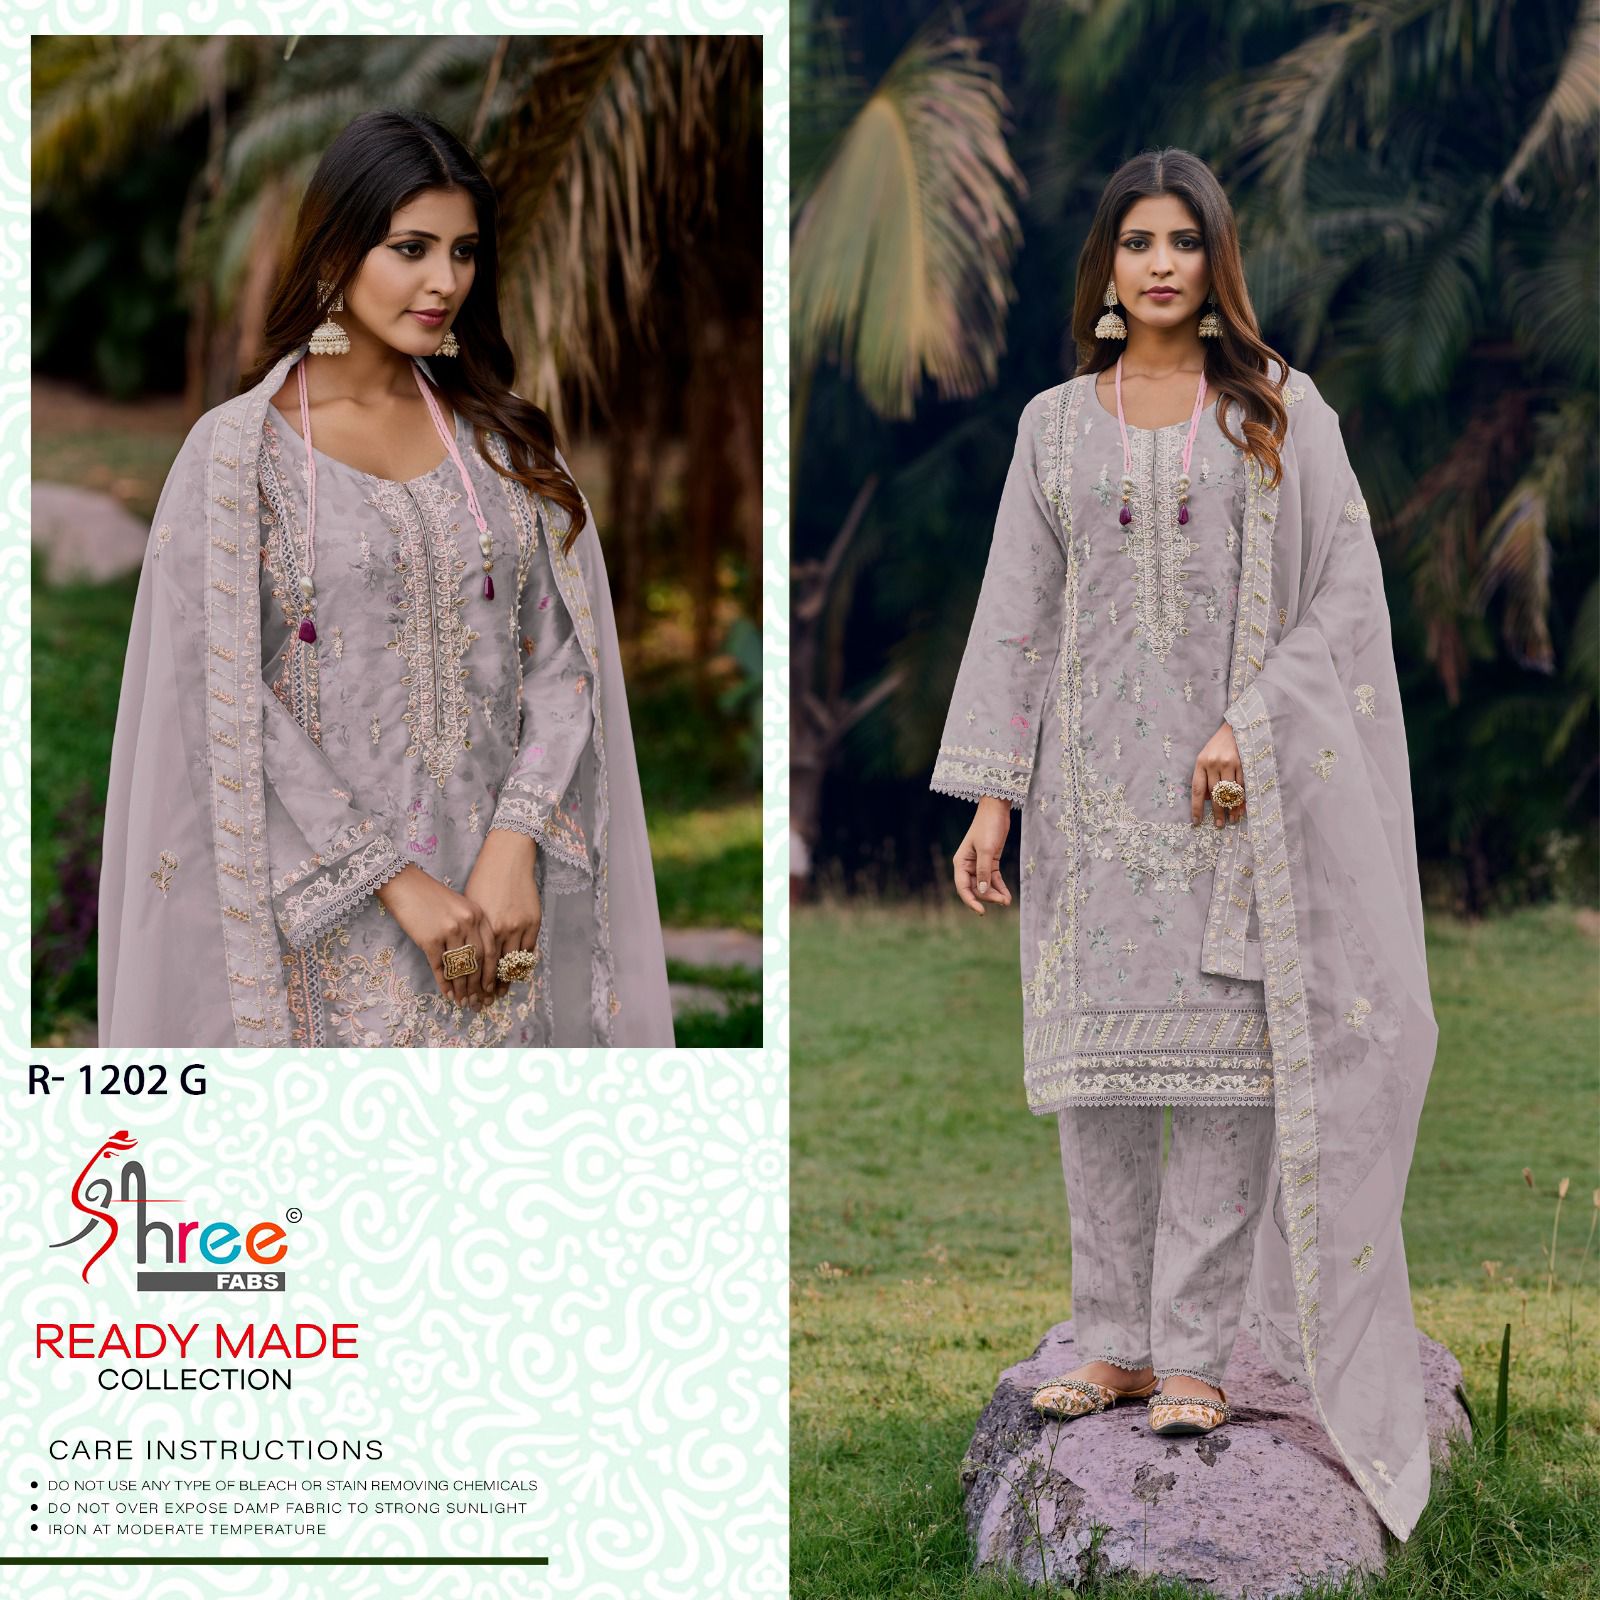 SHREE FAB READY MADE COLLECTION R-1202-G